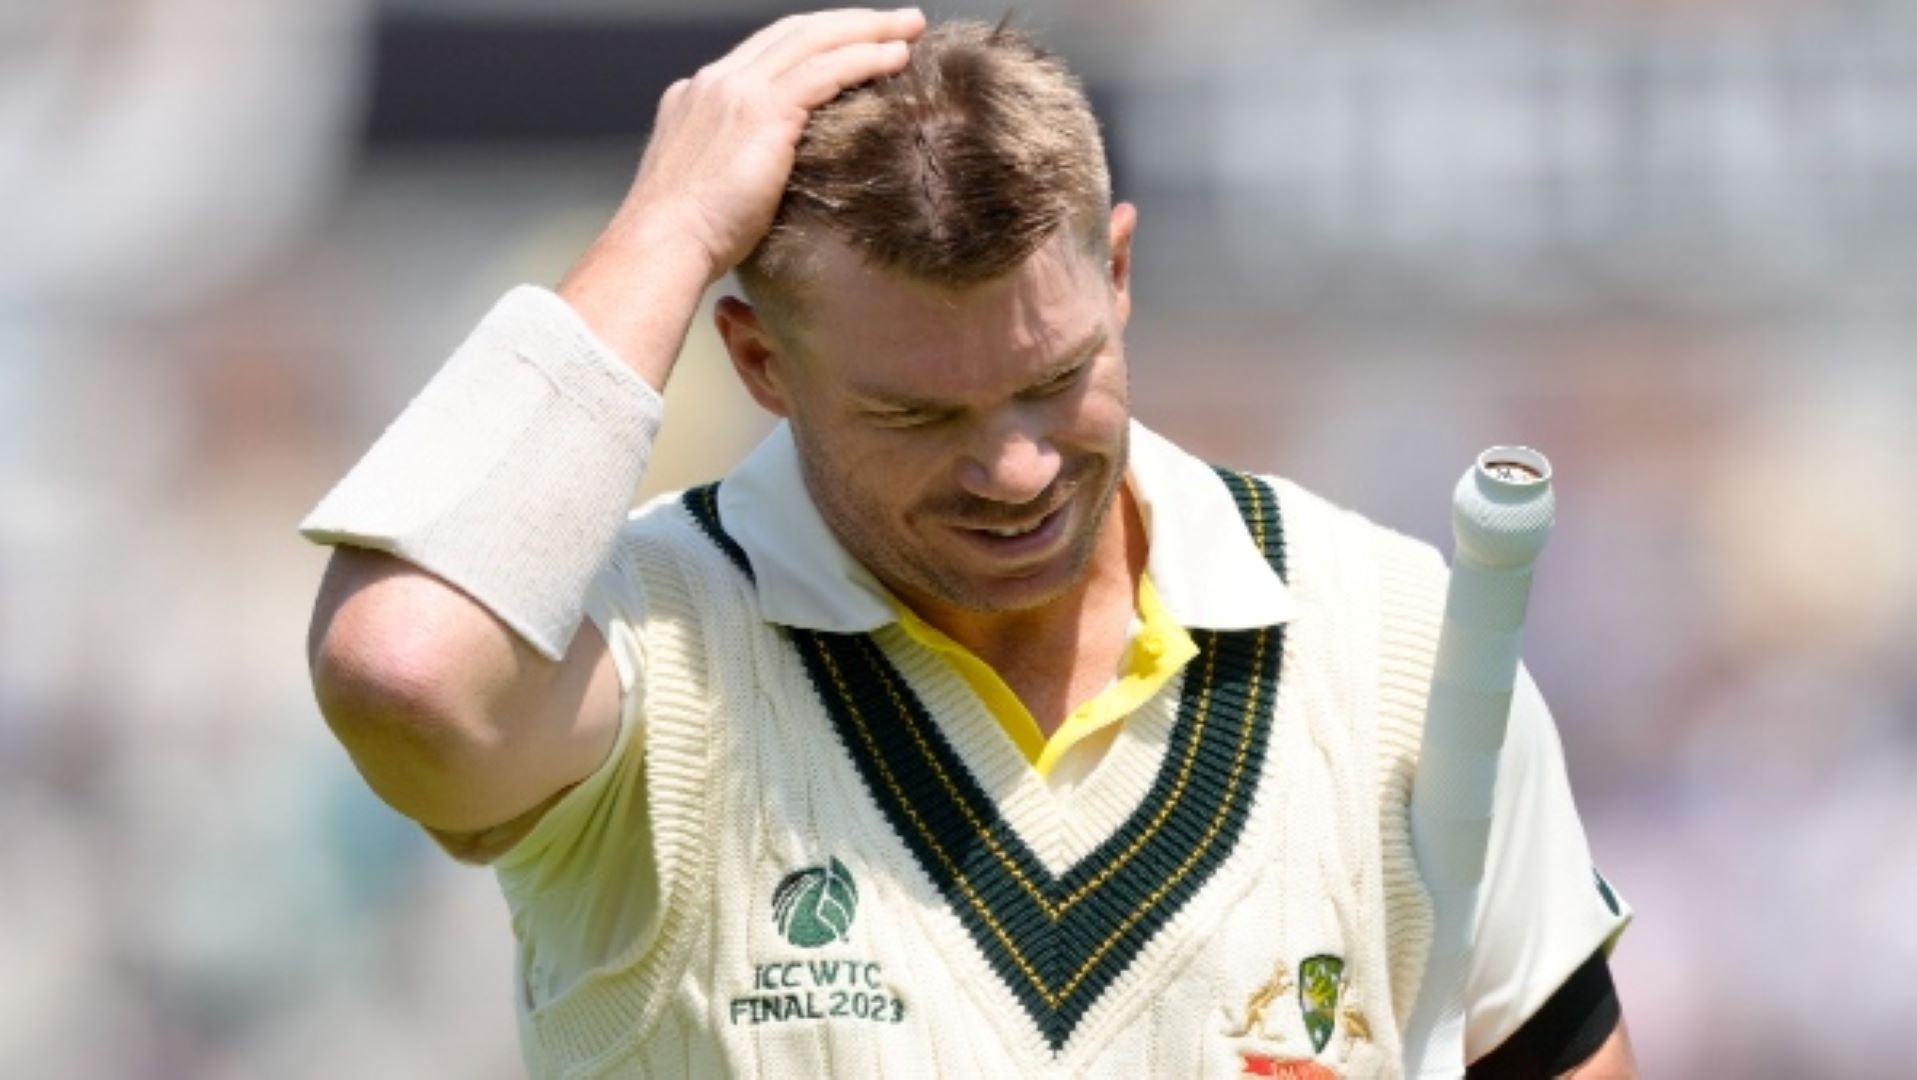 David Warner failed to convert another start on Day 1 at the Oval